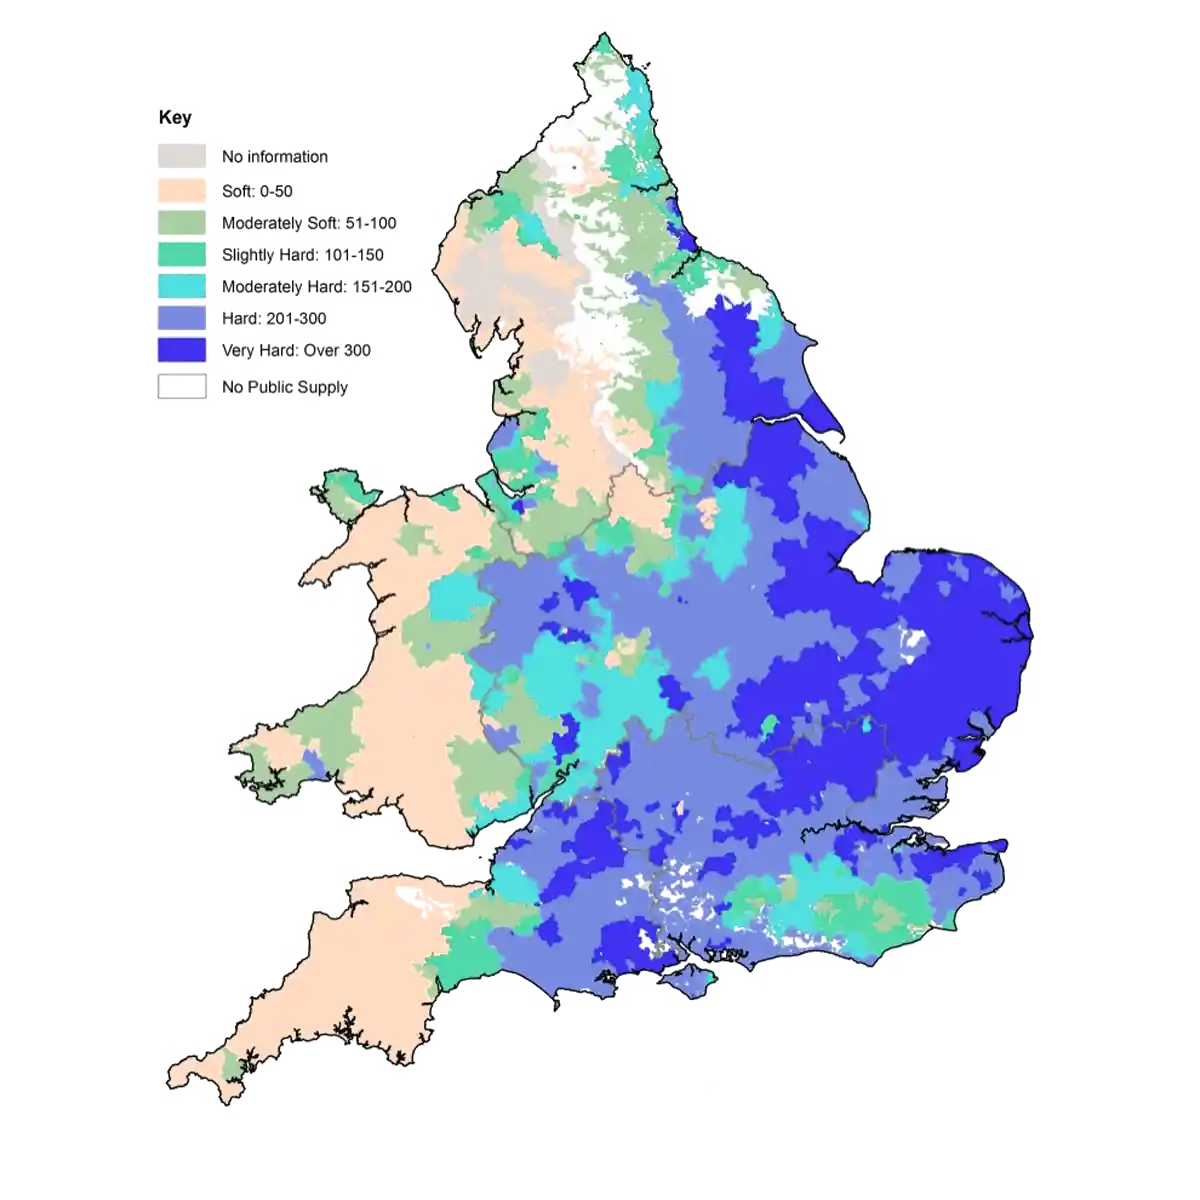 water-hardness-map-of-the-united-kingdom